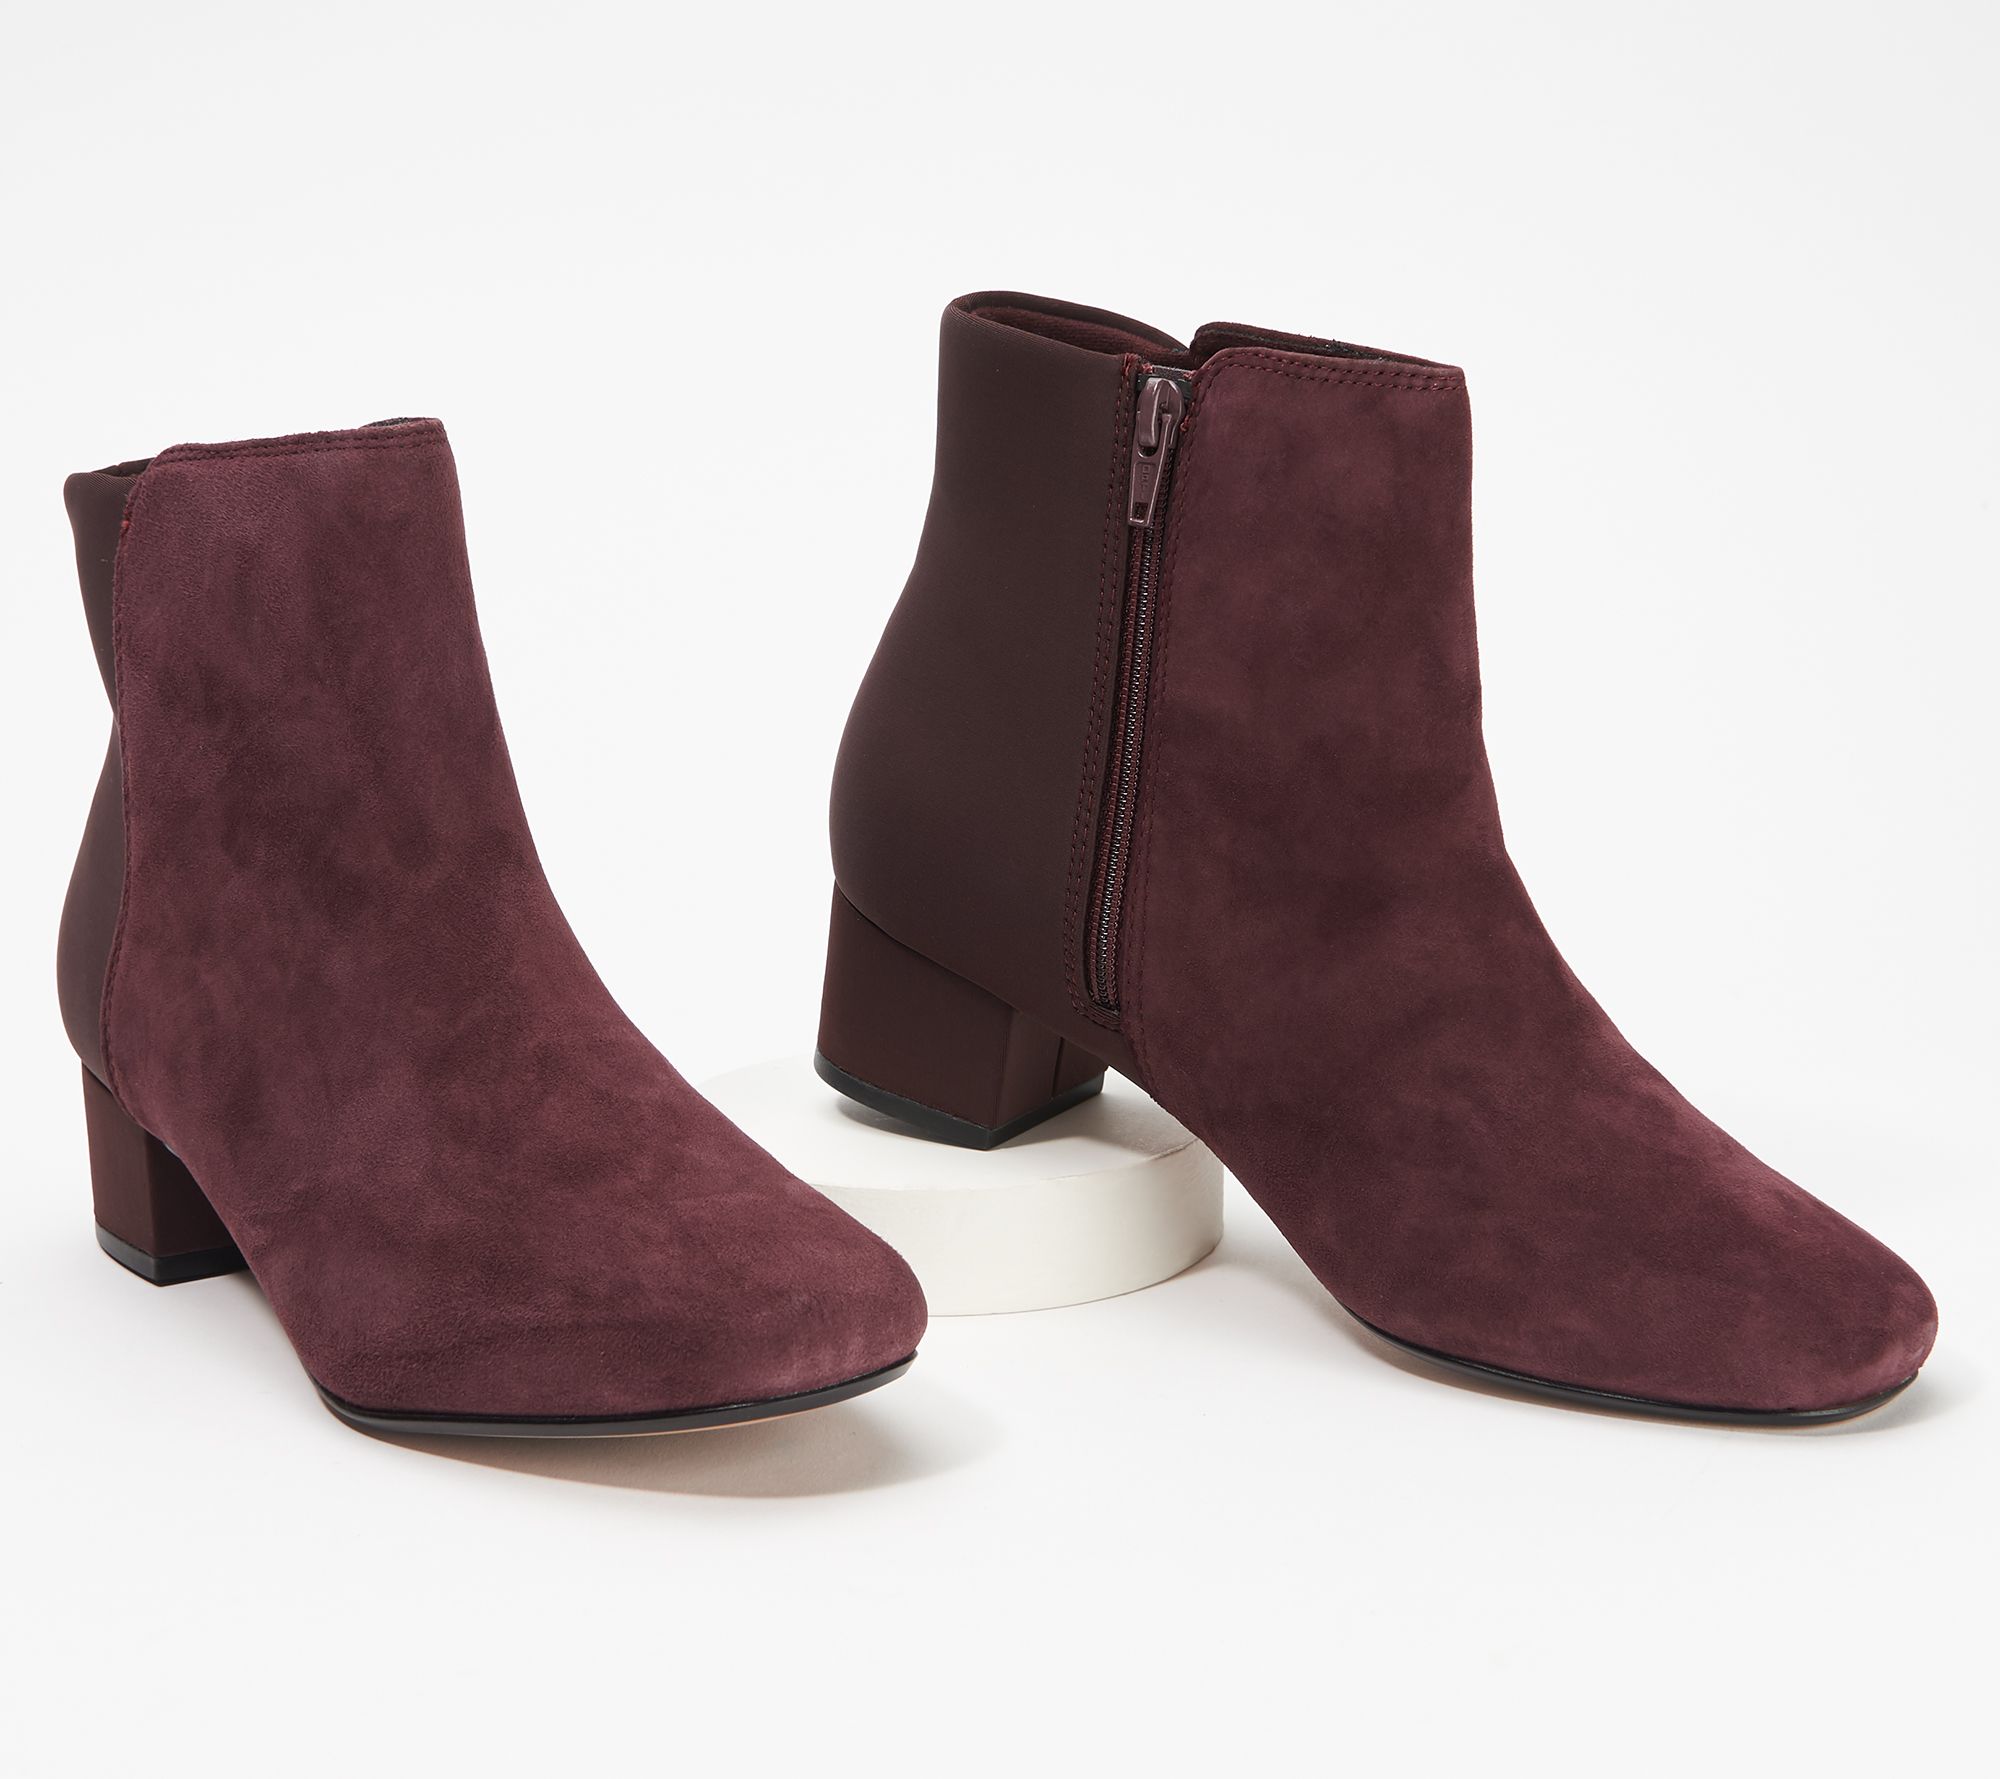 qvc clarks wedge boots